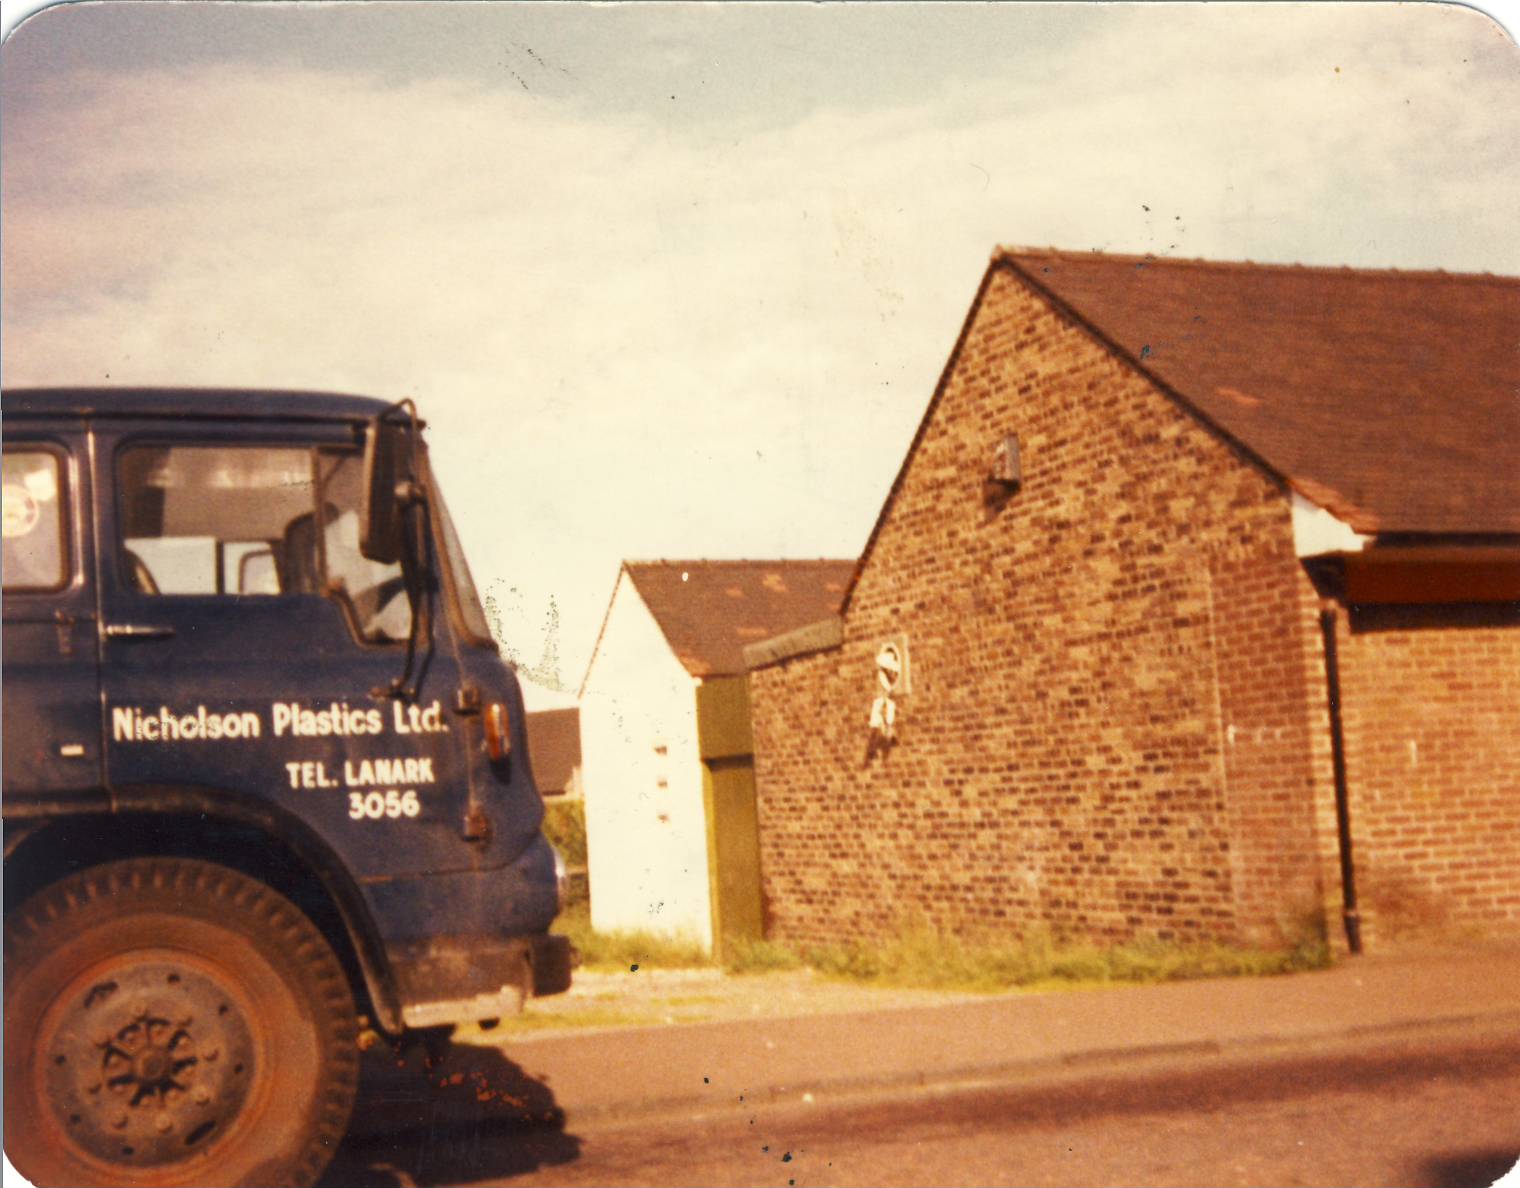 Nicholson Plastics truck at the first premises in the 1970s